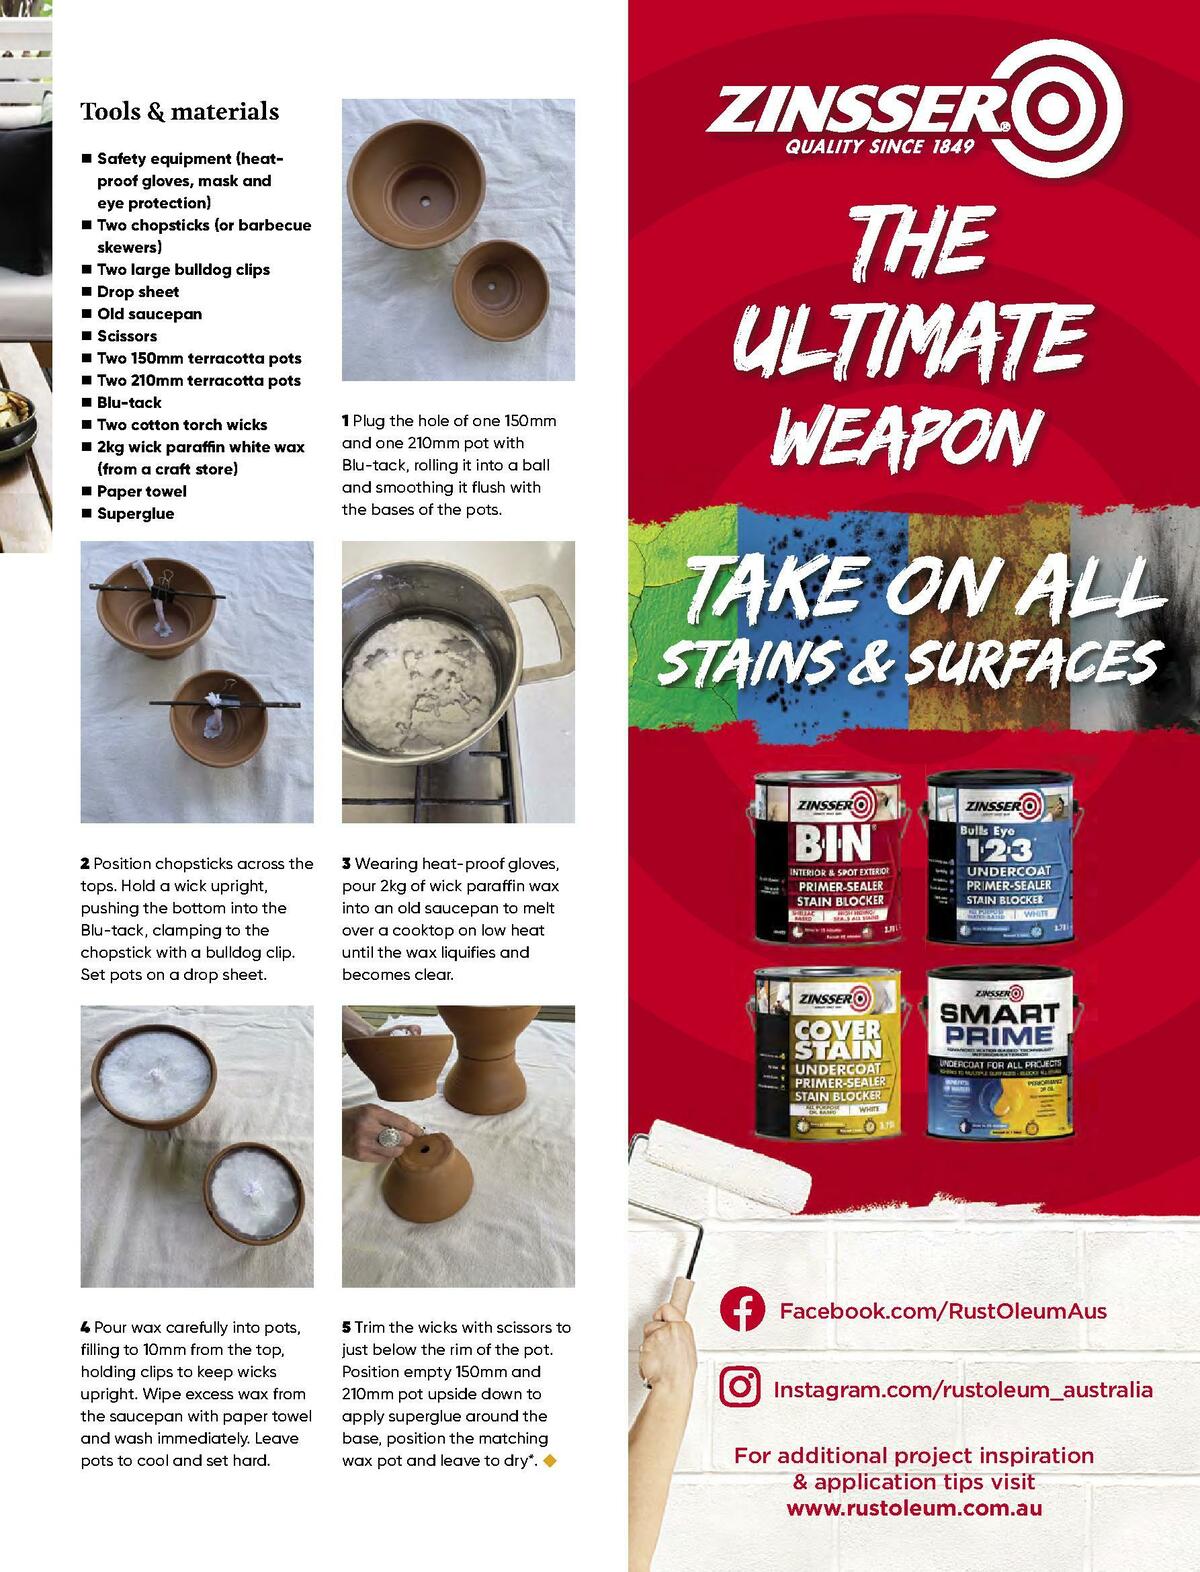 Bunnings Warehouse Magazine October Catalogues from 1 October